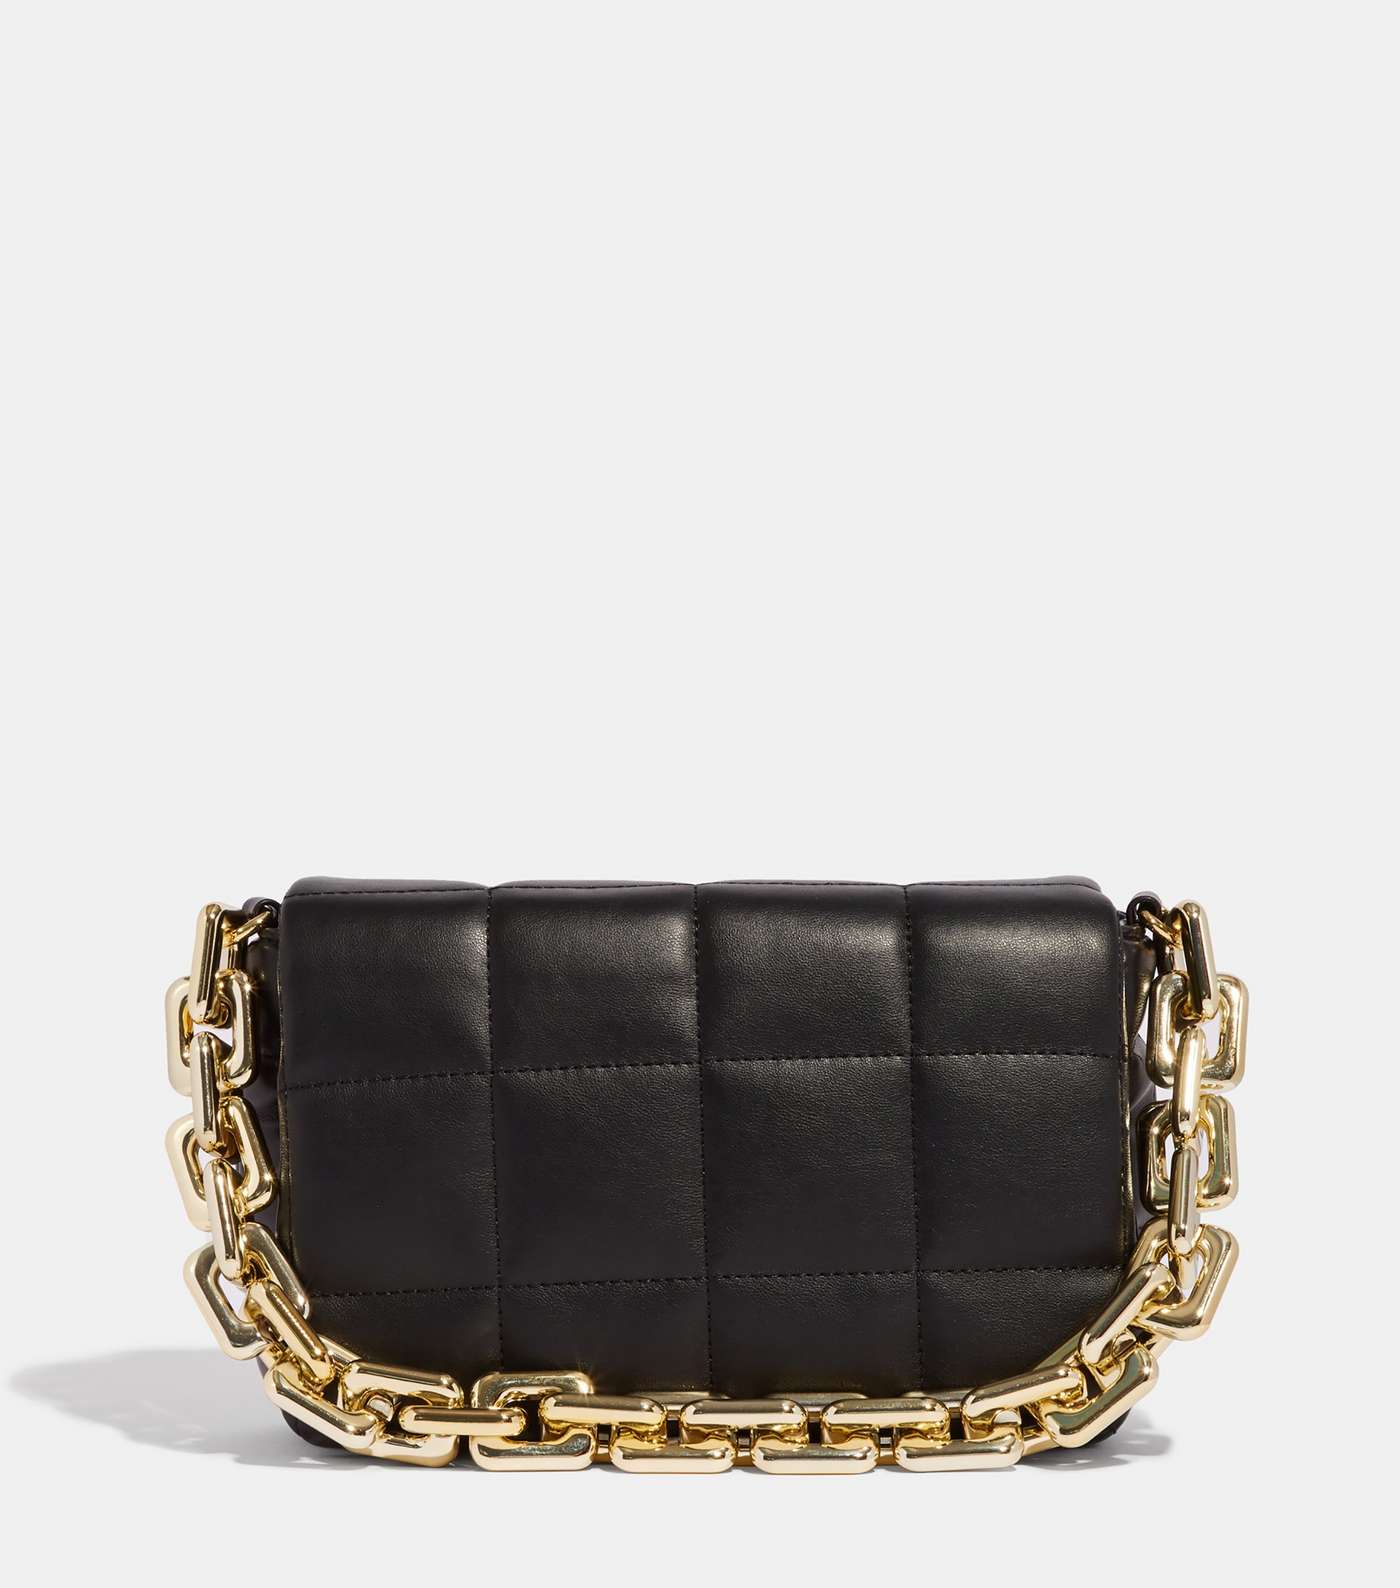 Skinnydip Black Leather-Look Quilted Chain Shoulder Bag